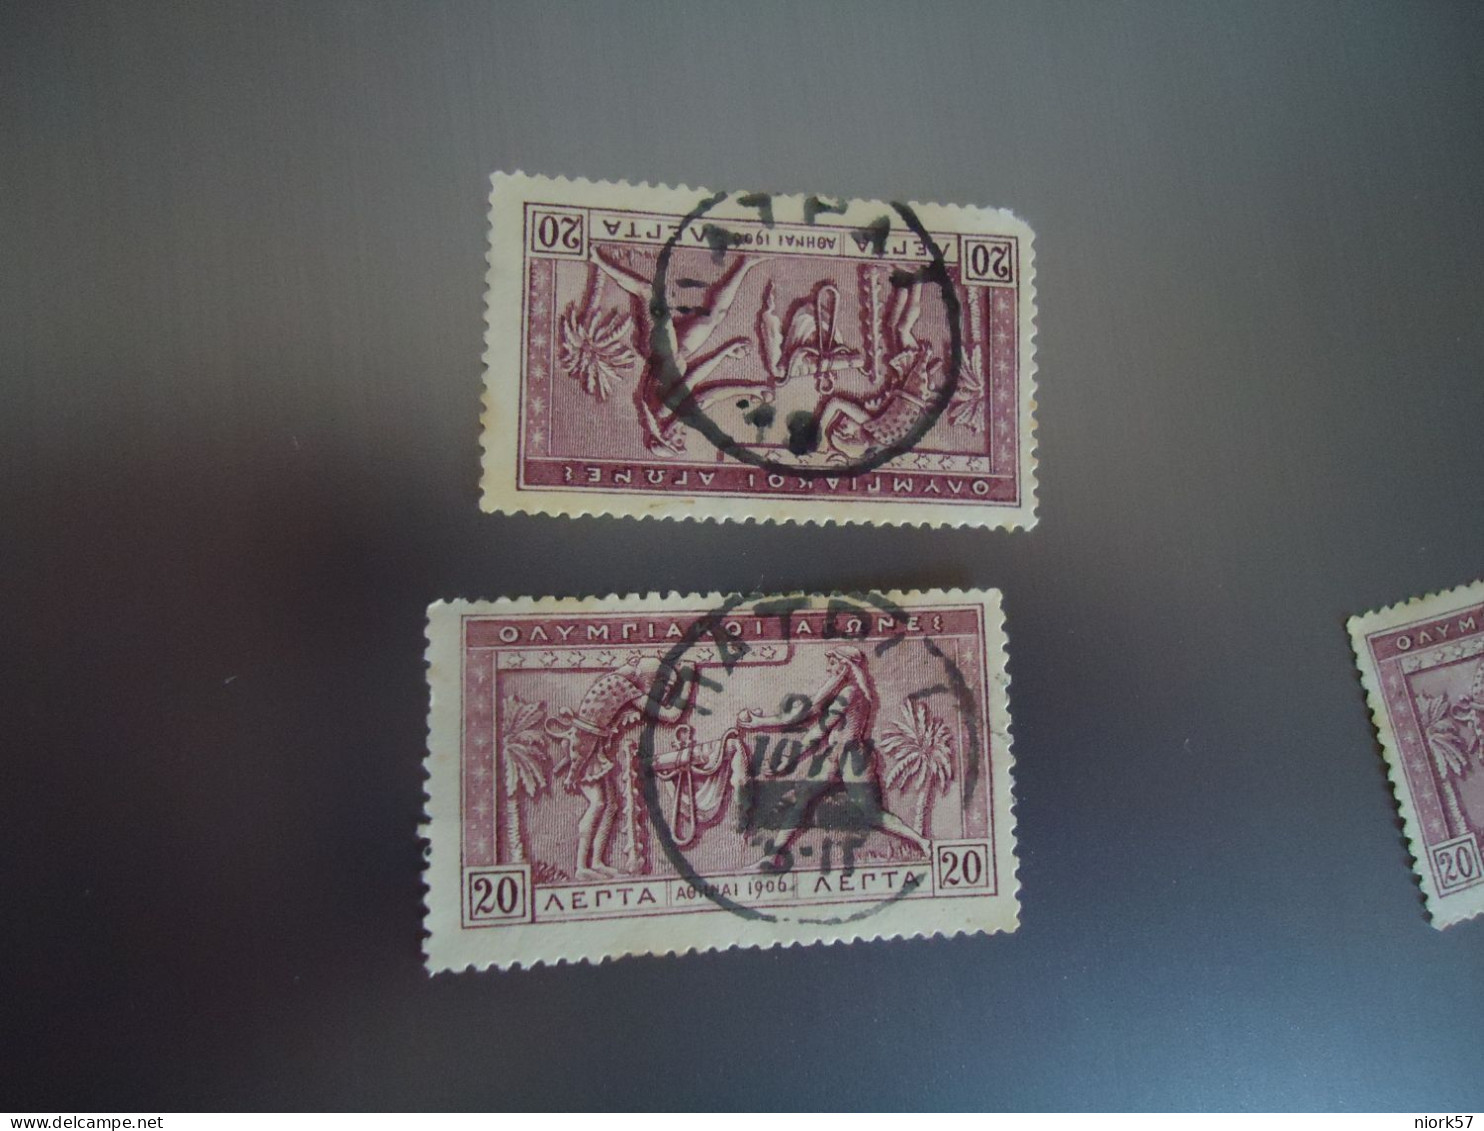 GREECE USED STAMPS  2 OLYMPIC GAMES POSTMARK  PATRAI  ΠΑΤΡΑ - Marcofilie - EMA (Printer)